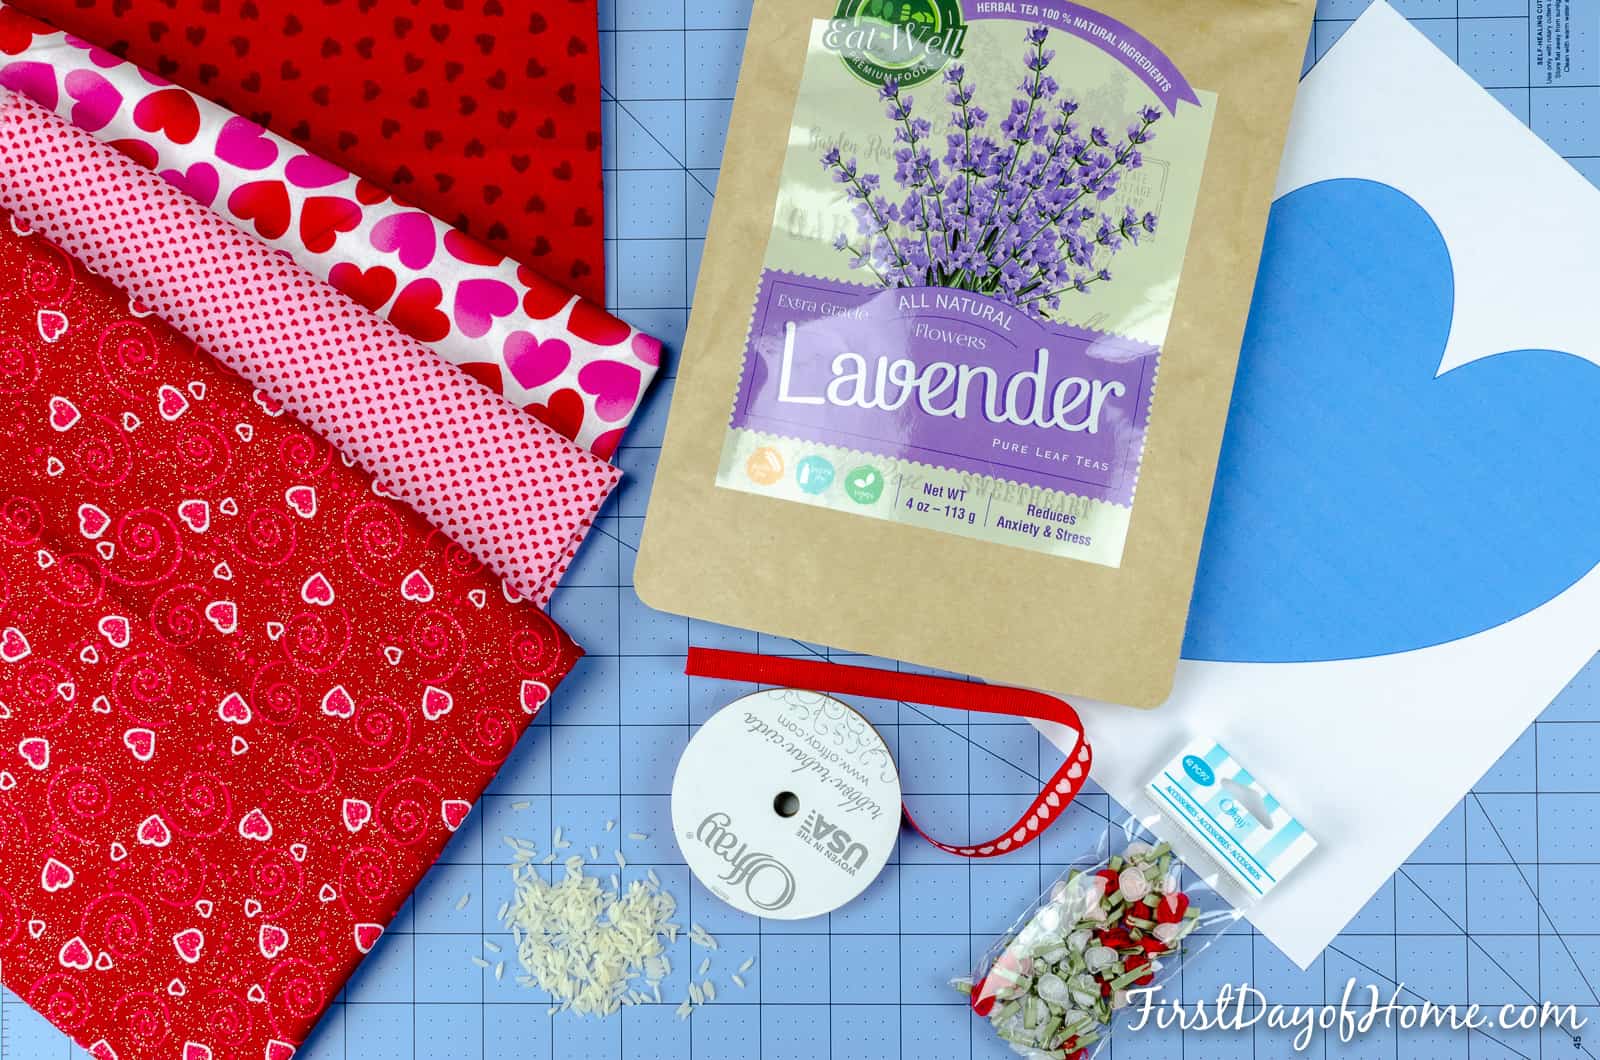 Ingredients to make a lavender heating pad for neck, shoulders, feet and any aches and pains